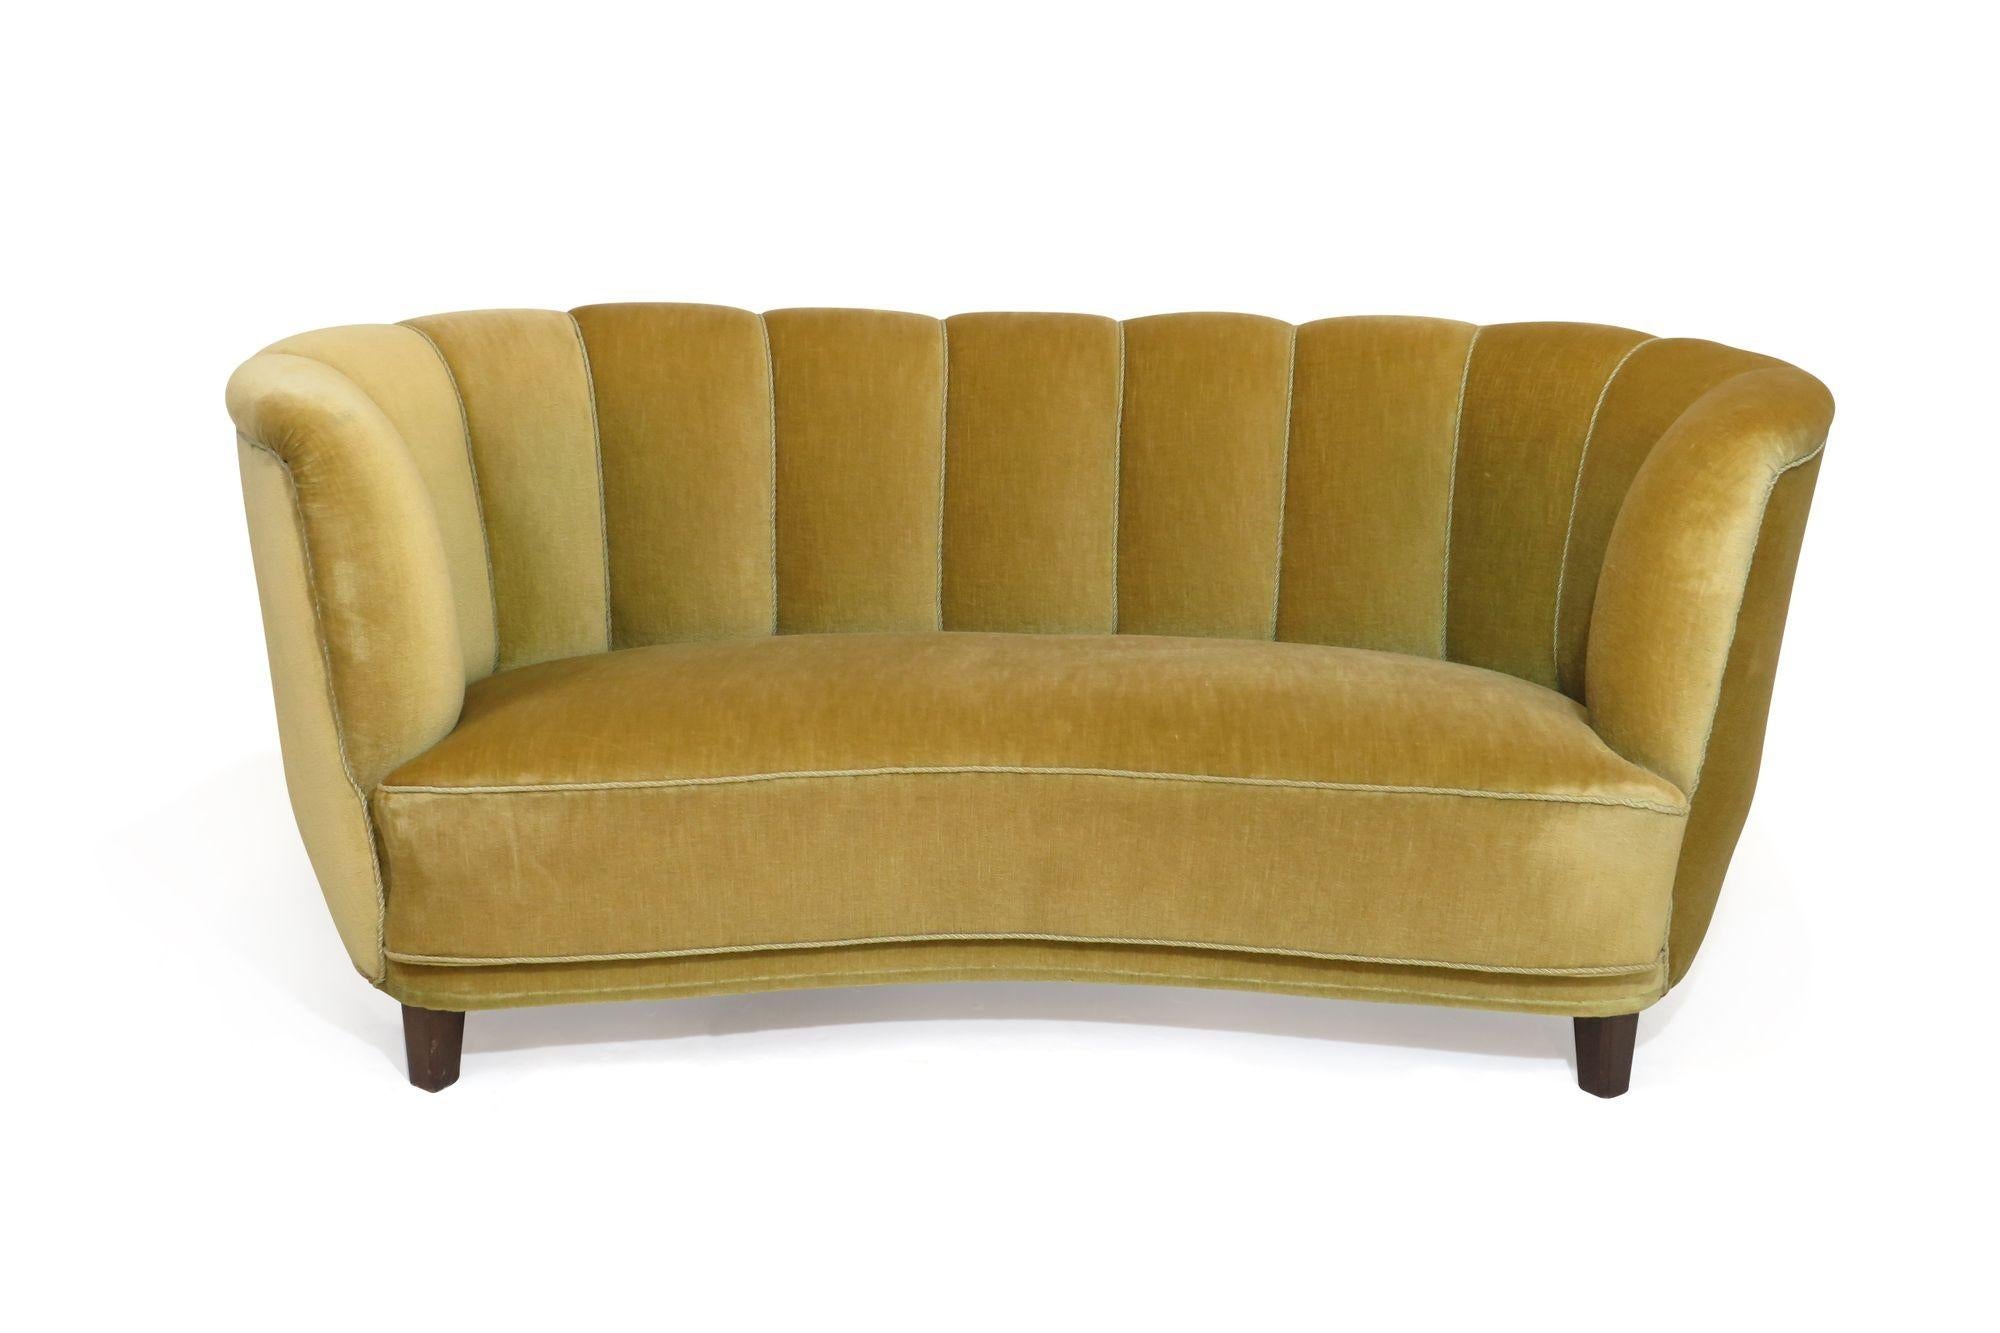 Danish channel back curved settee crafted of a solid wood frame with eight-way hand-tied springs, horsehair and cotton padding, covered in the original yellow gold mohair. Good vintage condition can be used as found, or fully reupholstered.
 
Seat